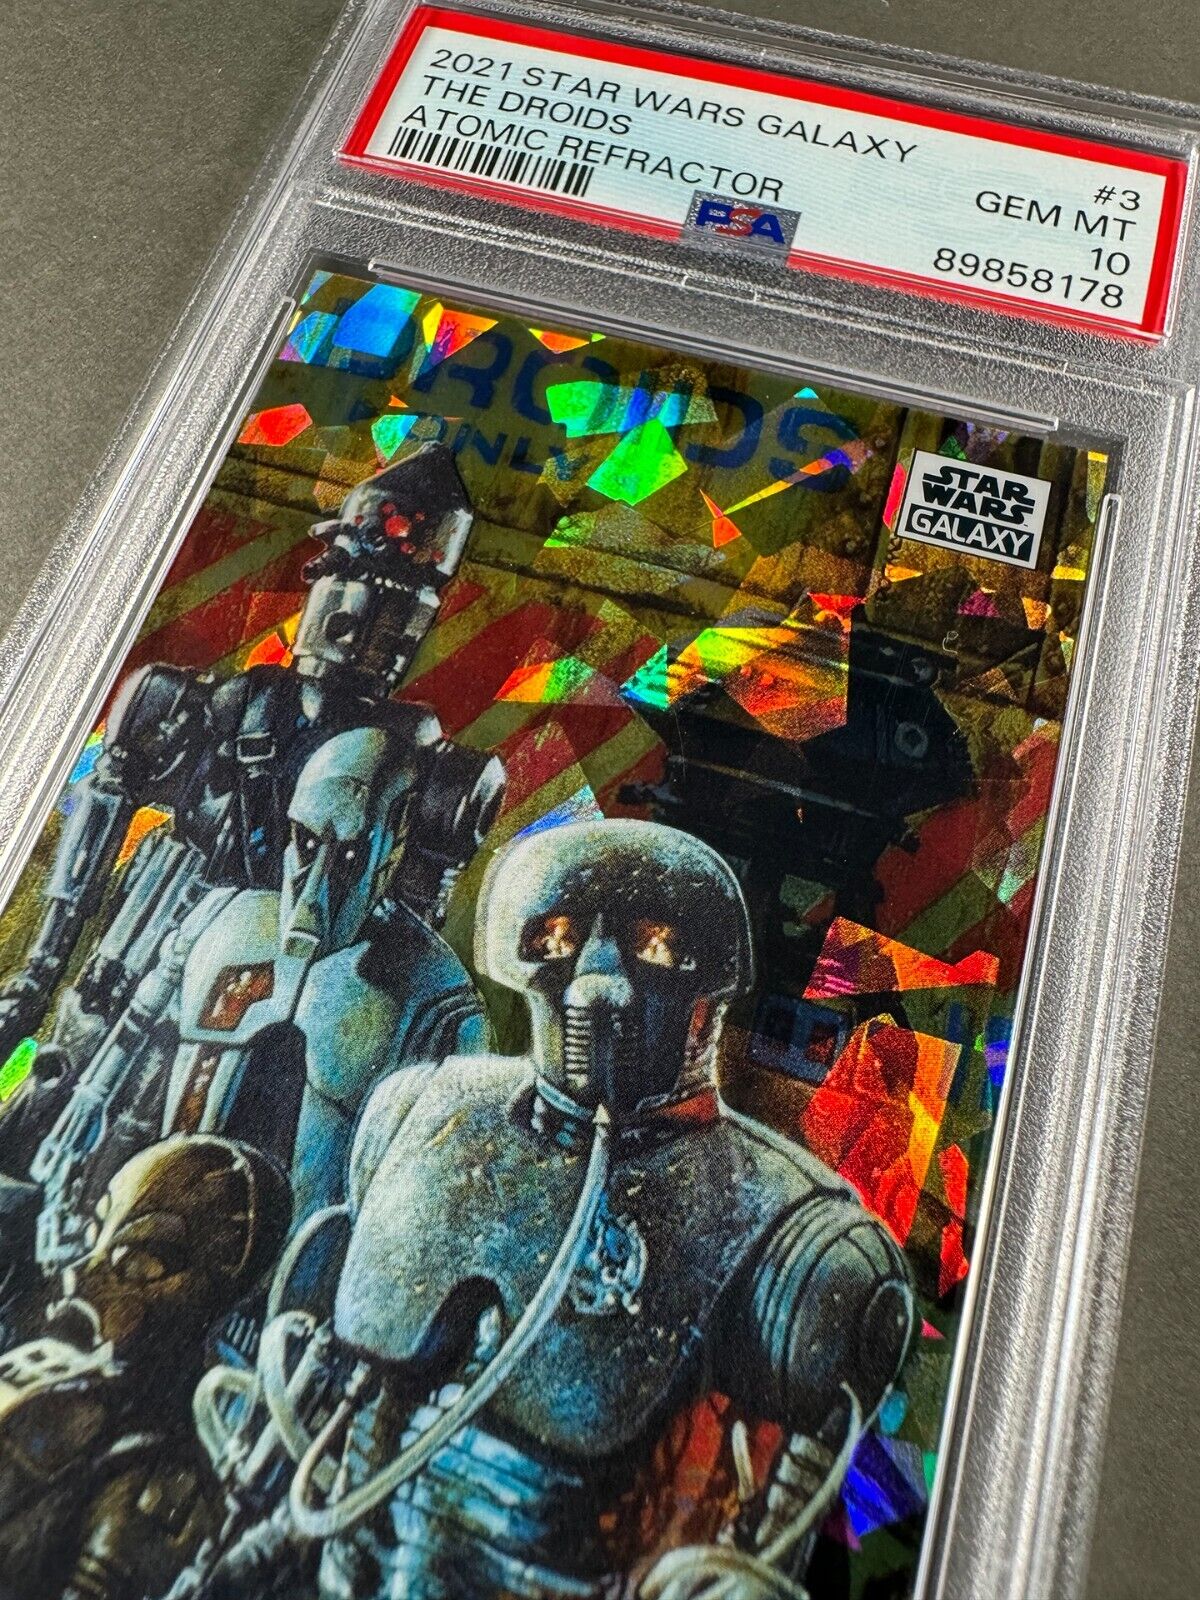 (PSA 10) 2021 Star Wars Galaxy #3, “The Droids” Atomic Refractor /150